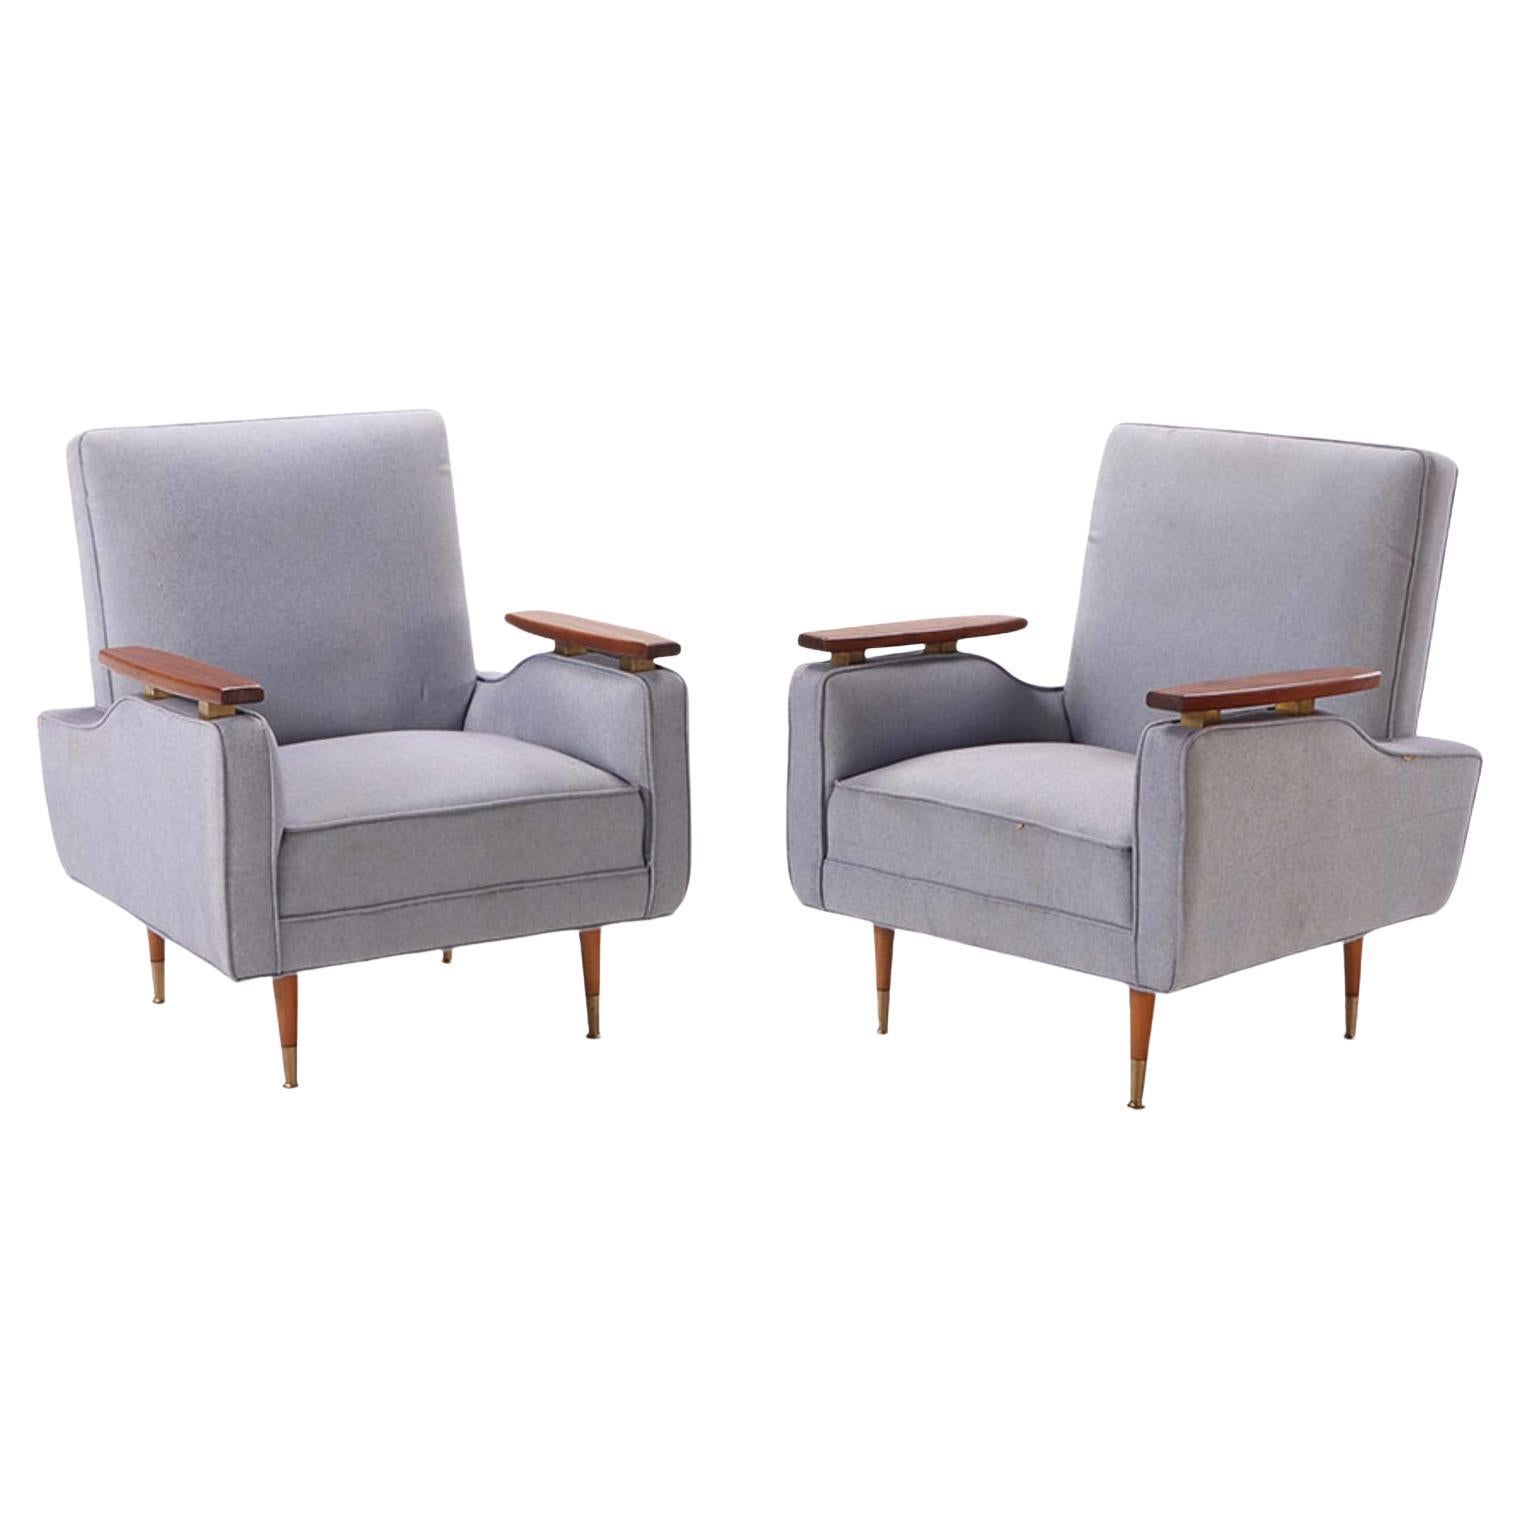 A pair of newly upholstered lounge chairs in the manner of Finn Juhl circa 1950.